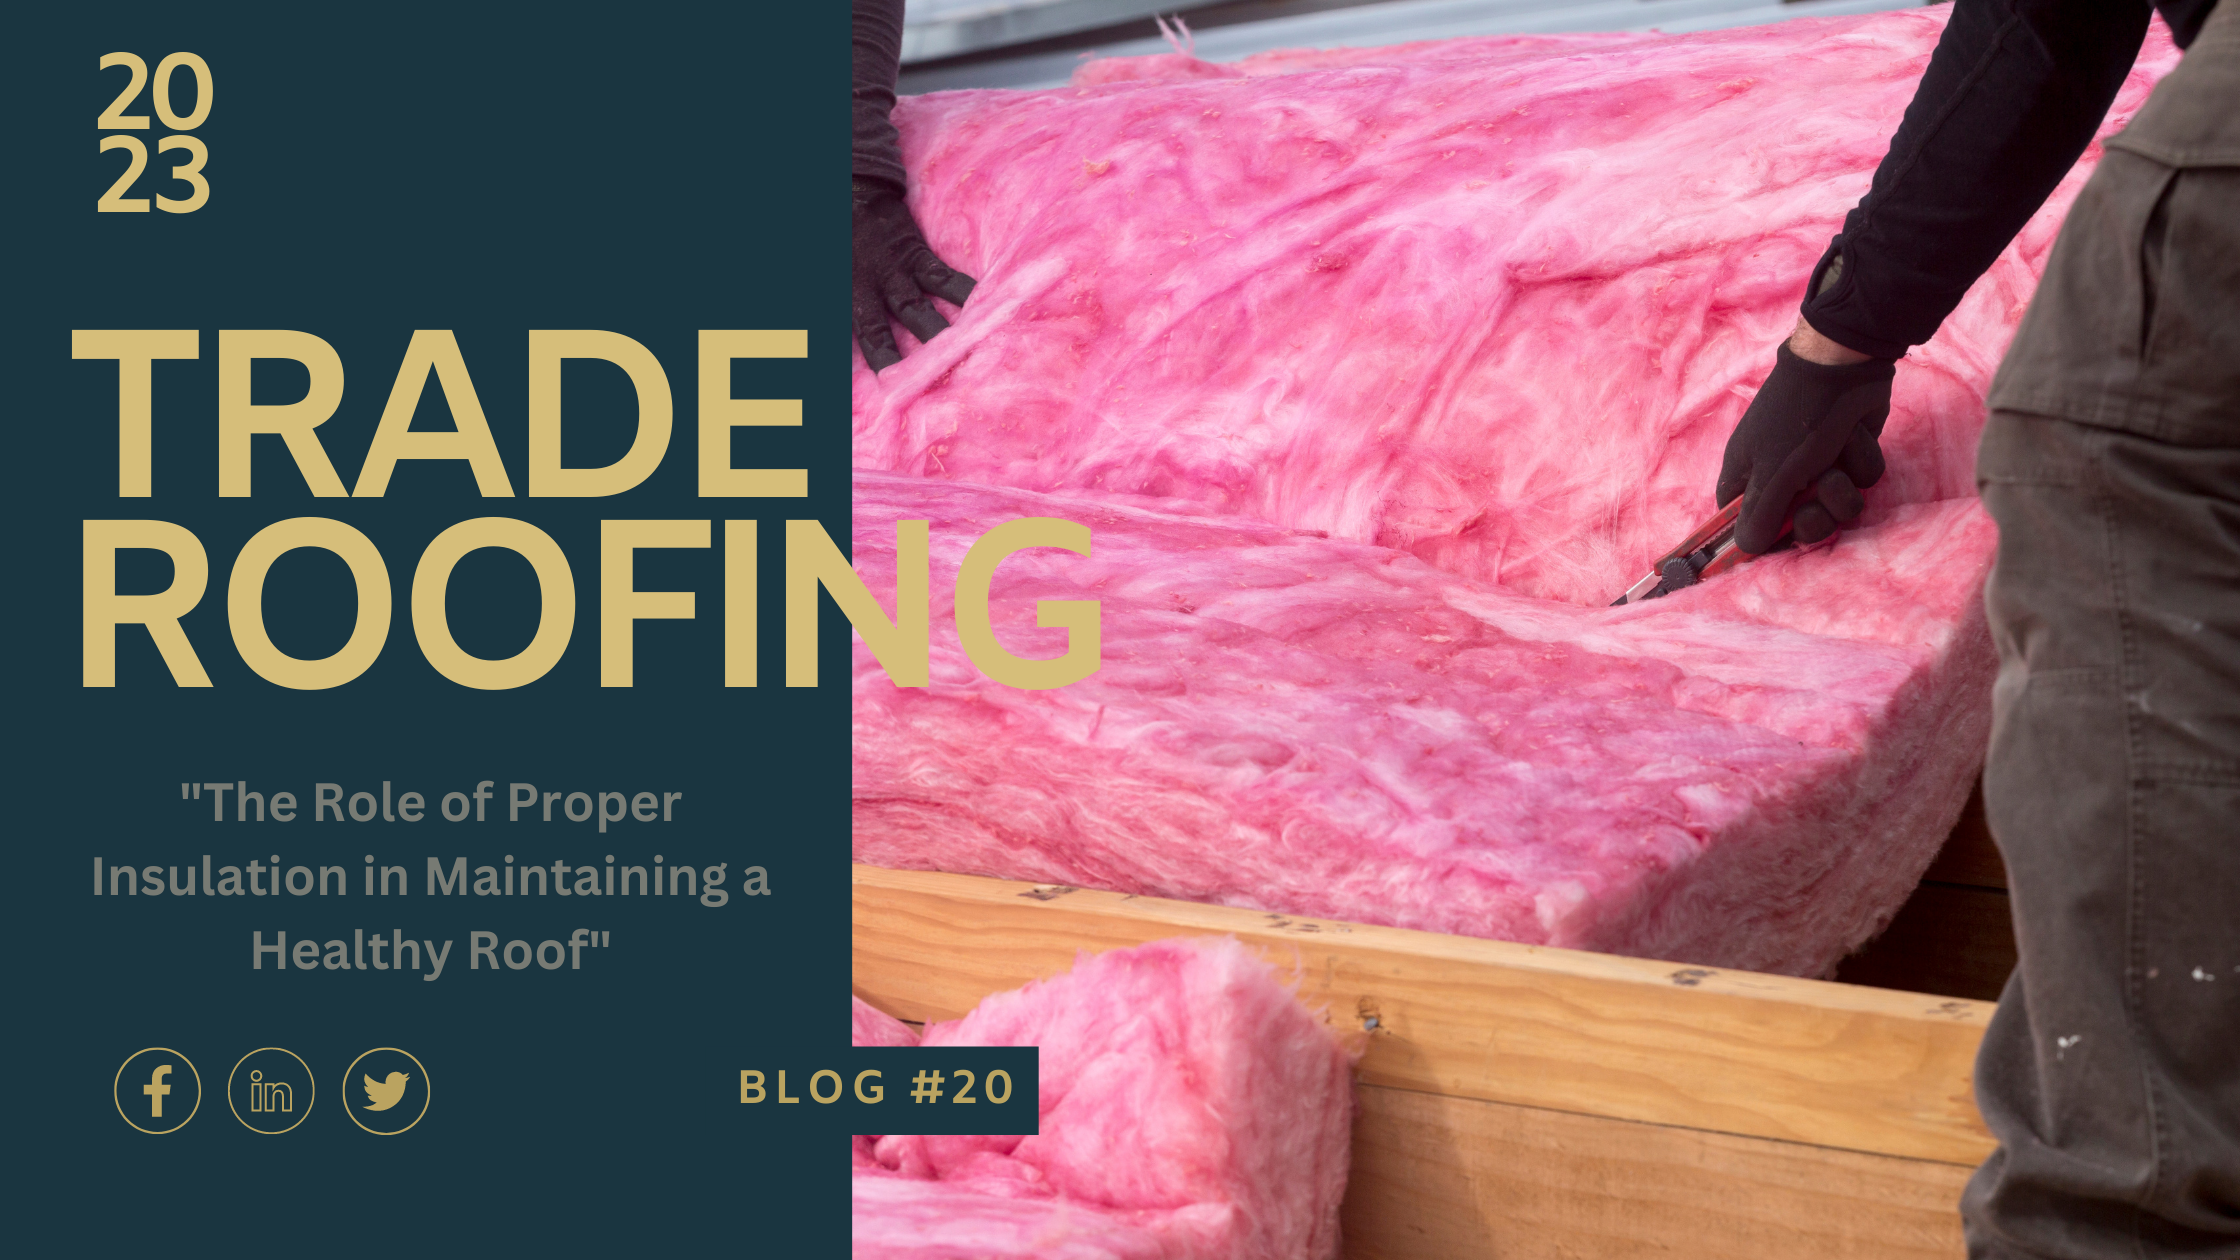 The Role of Proper Insulation in Maintaining a Healthy Roof